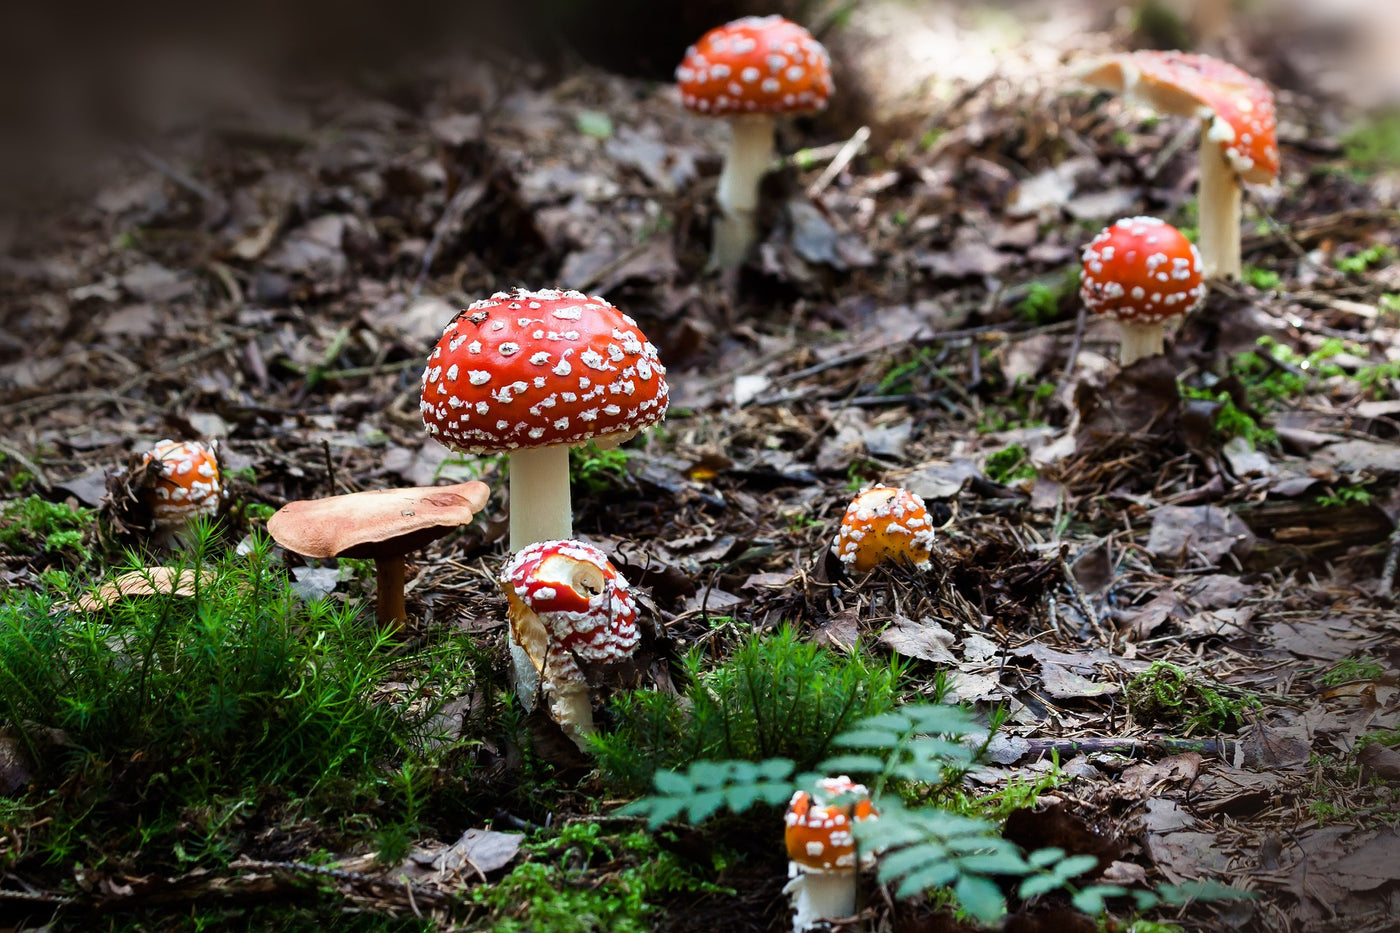 red capped mushrooms on the forest floor